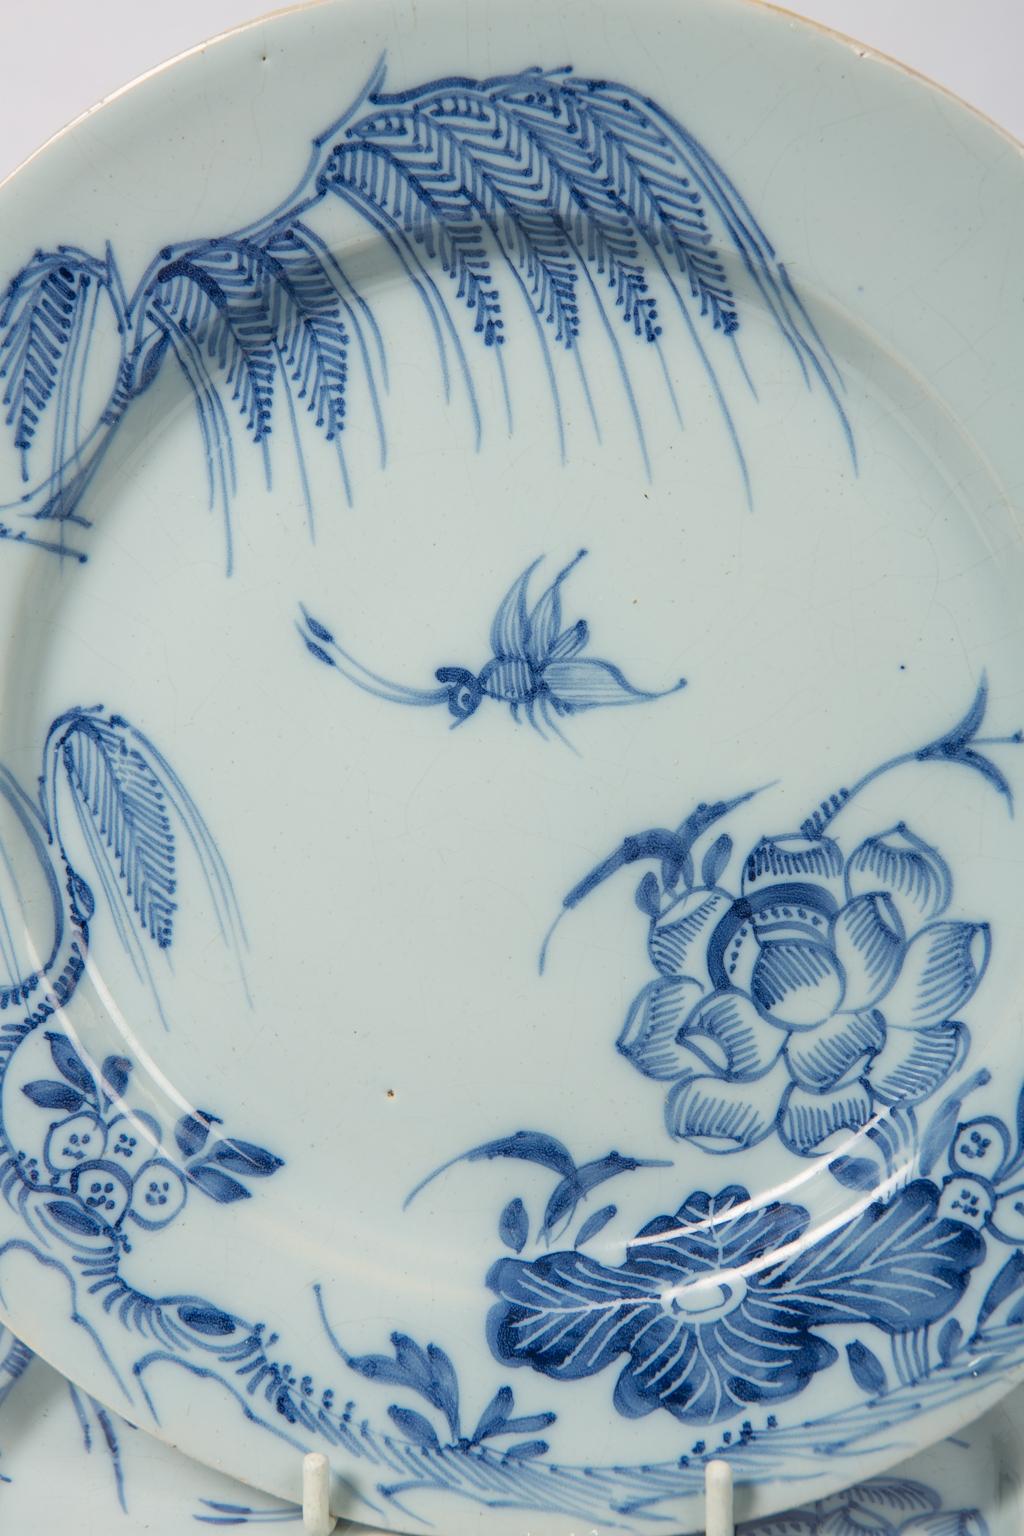 WHY WE LOVE IT: On one of those crazy days looking at this brings serenity.
A set of five antique blue and white delft plates painted in a medium cobalt blue. These English delftware dishes were made in the mid-18th century most probably in Lambeth,